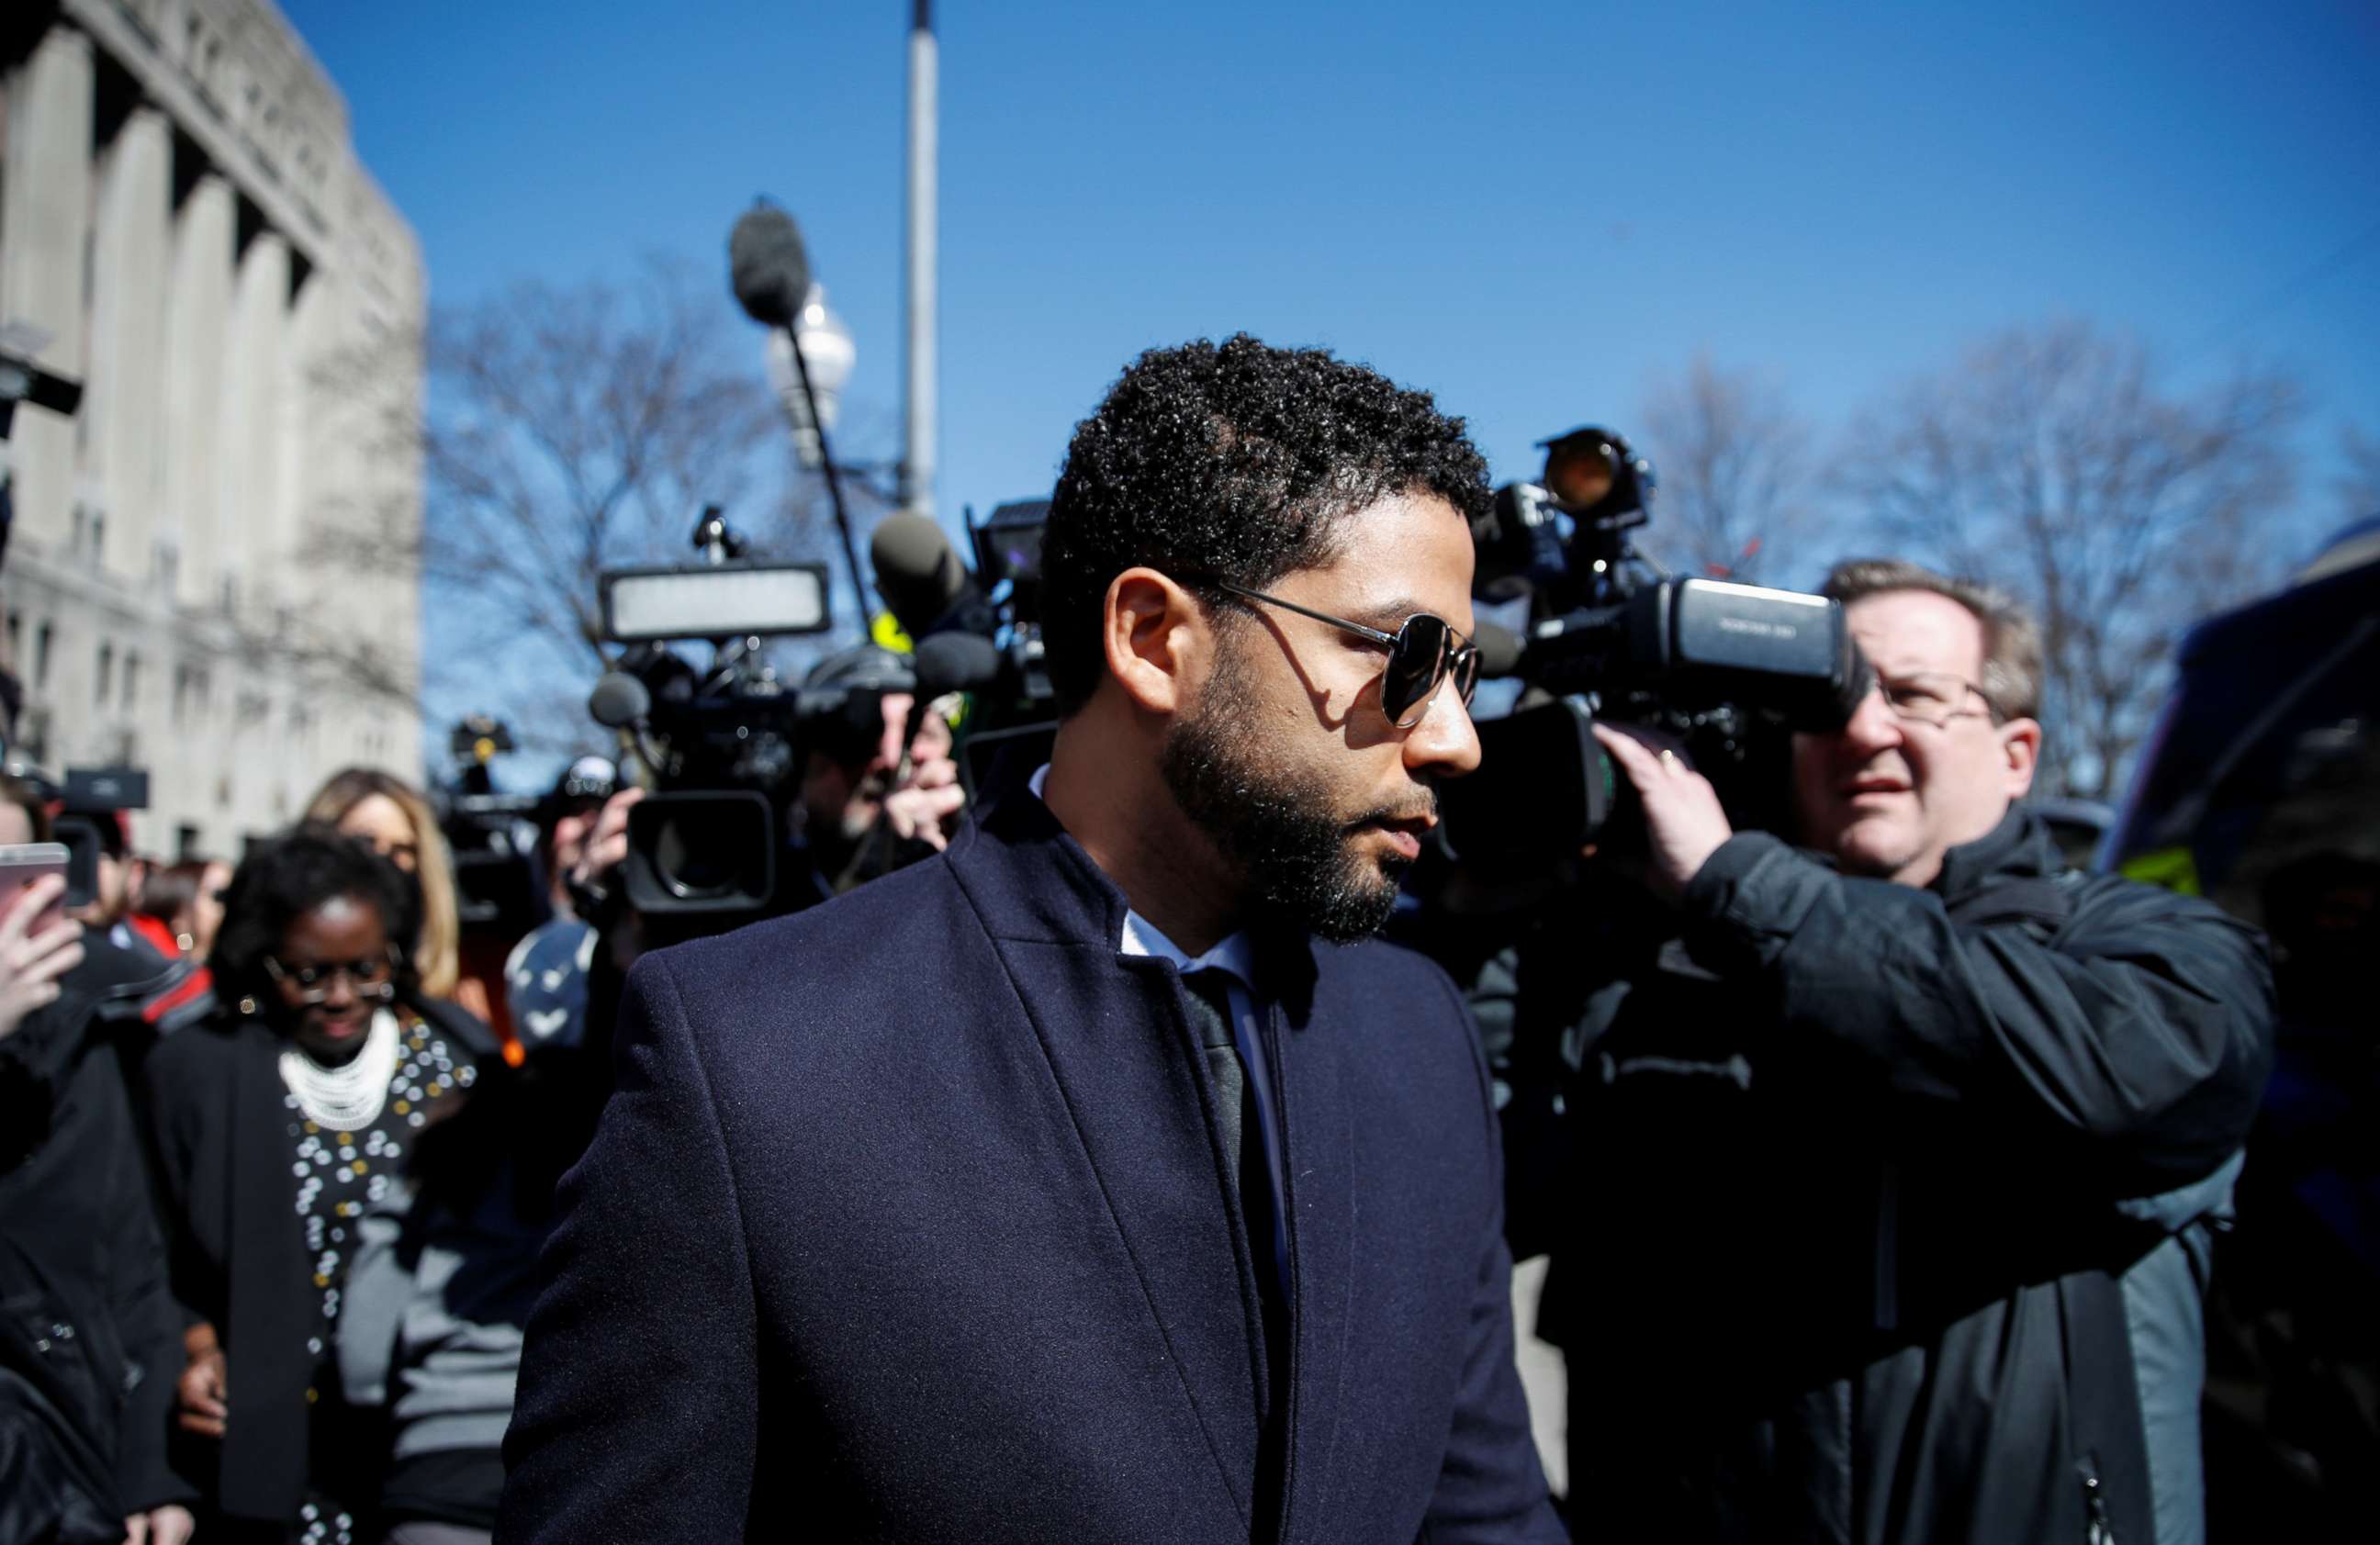 PHOTO: Jussie Smollett leaves court after charges against him were dropped by state prosecutors in Chicago, March 26, 2019.